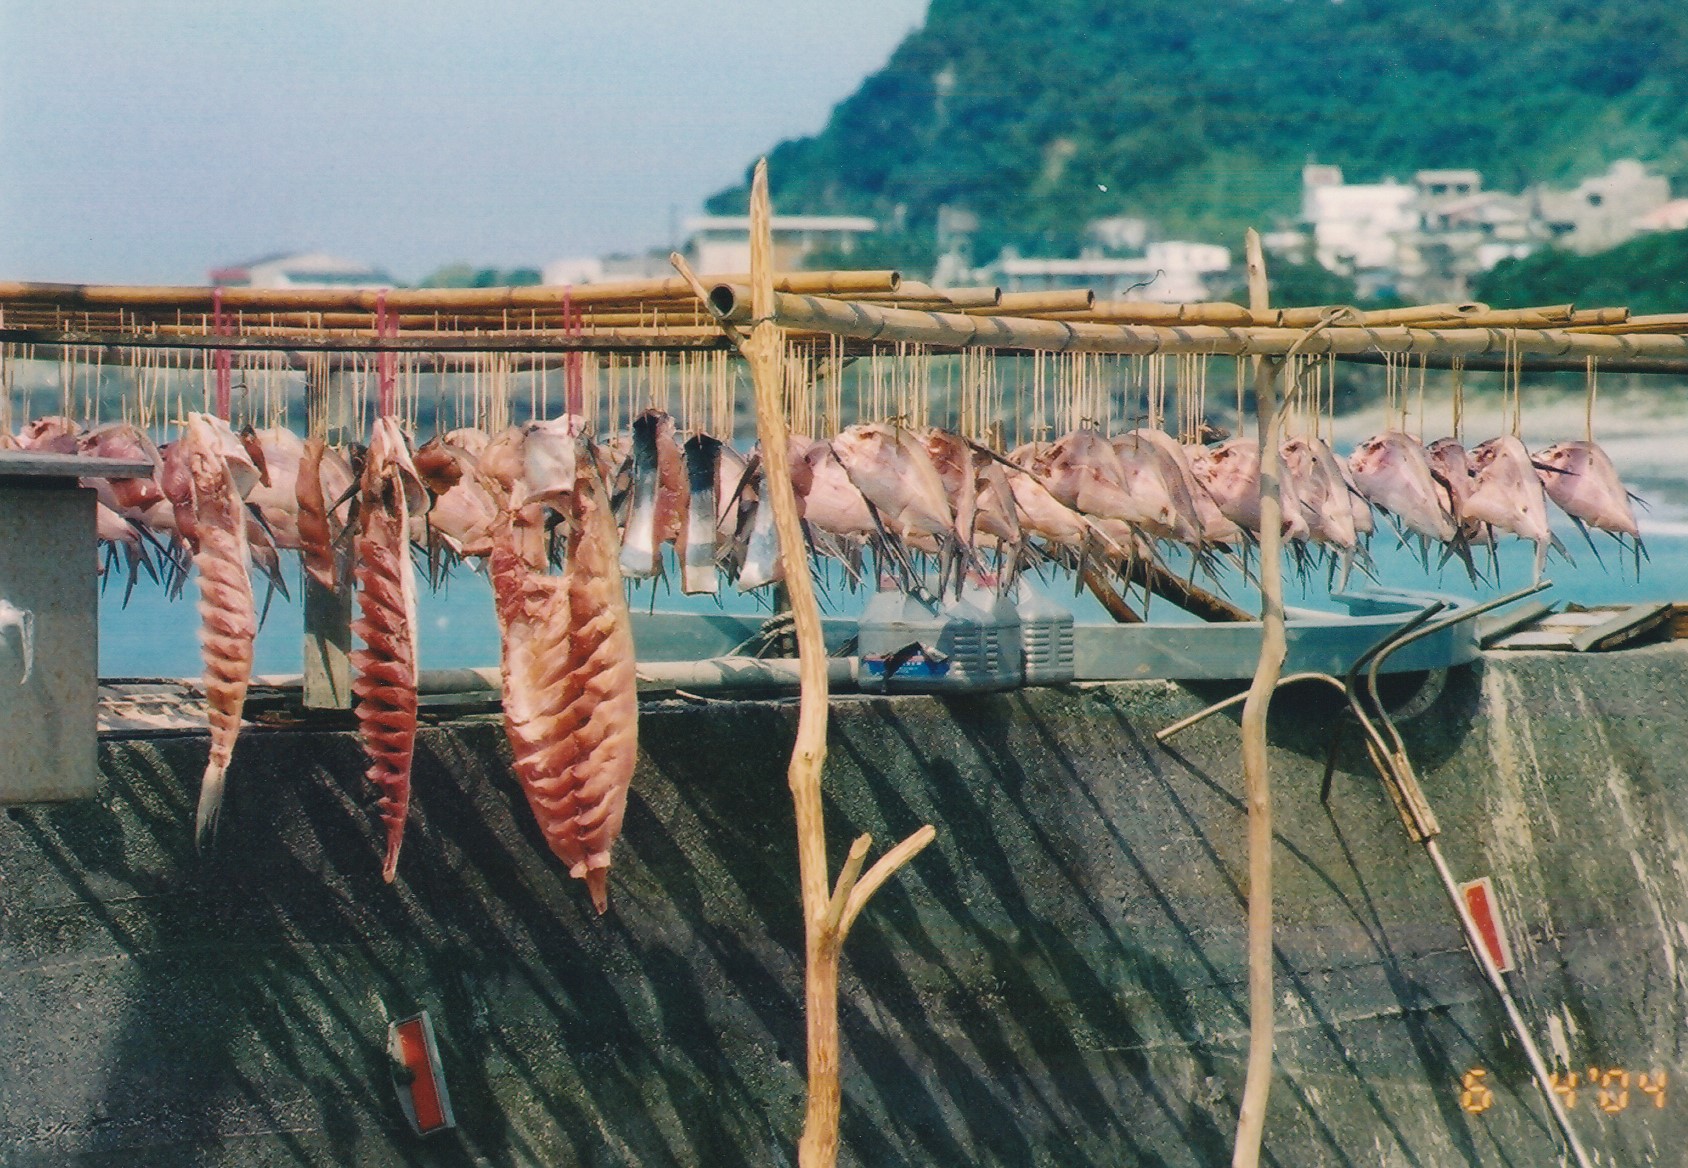 Air drying and preservation of fish